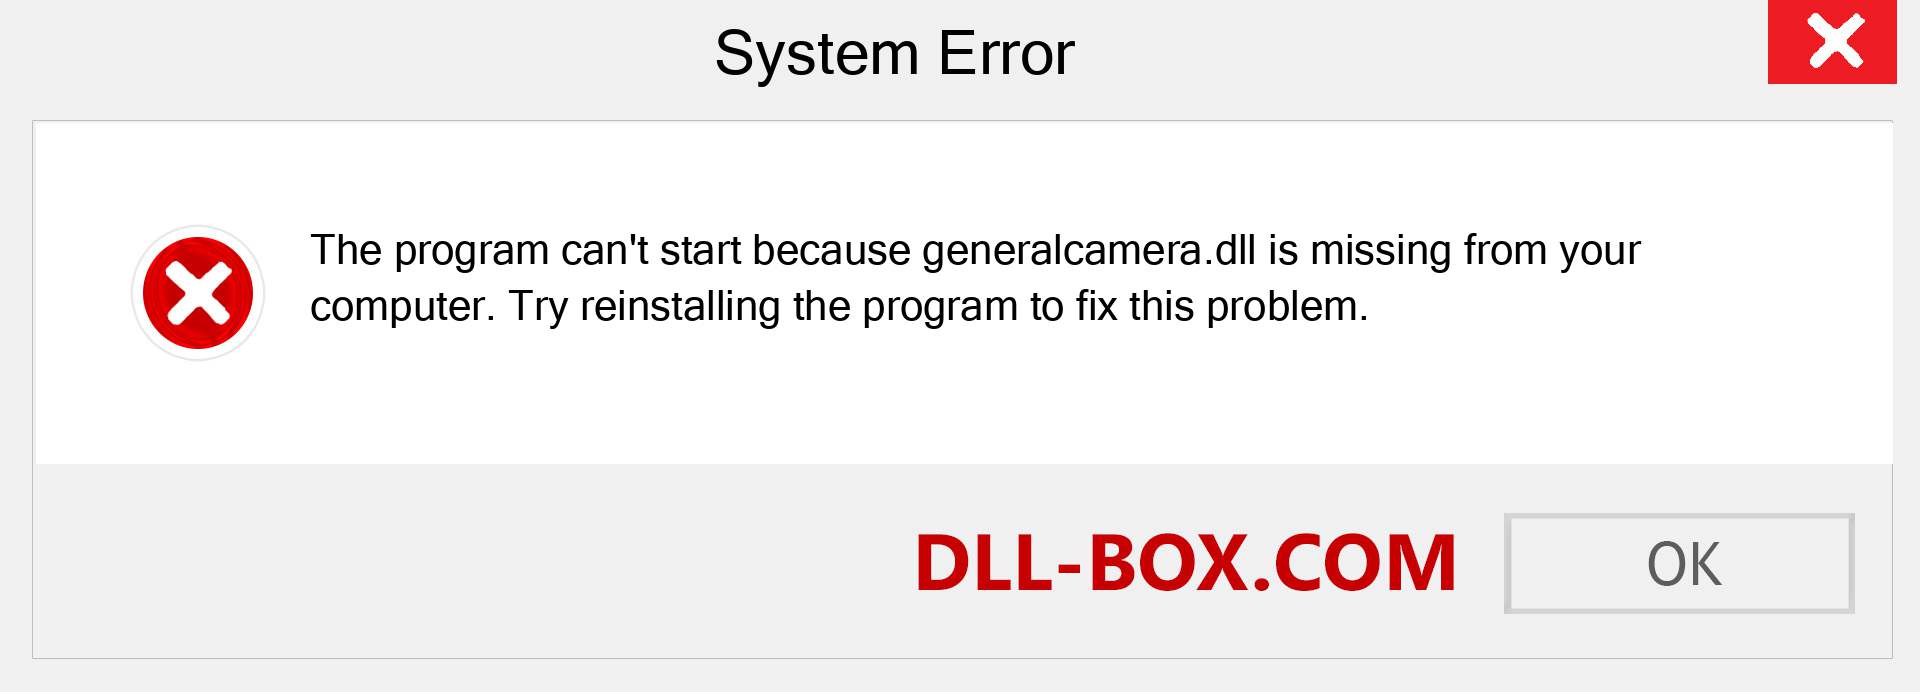  generalcamera.dll file is missing?. Download for Windows 7, 8, 10 - Fix  generalcamera dll Missing Error on Windows, photos, images